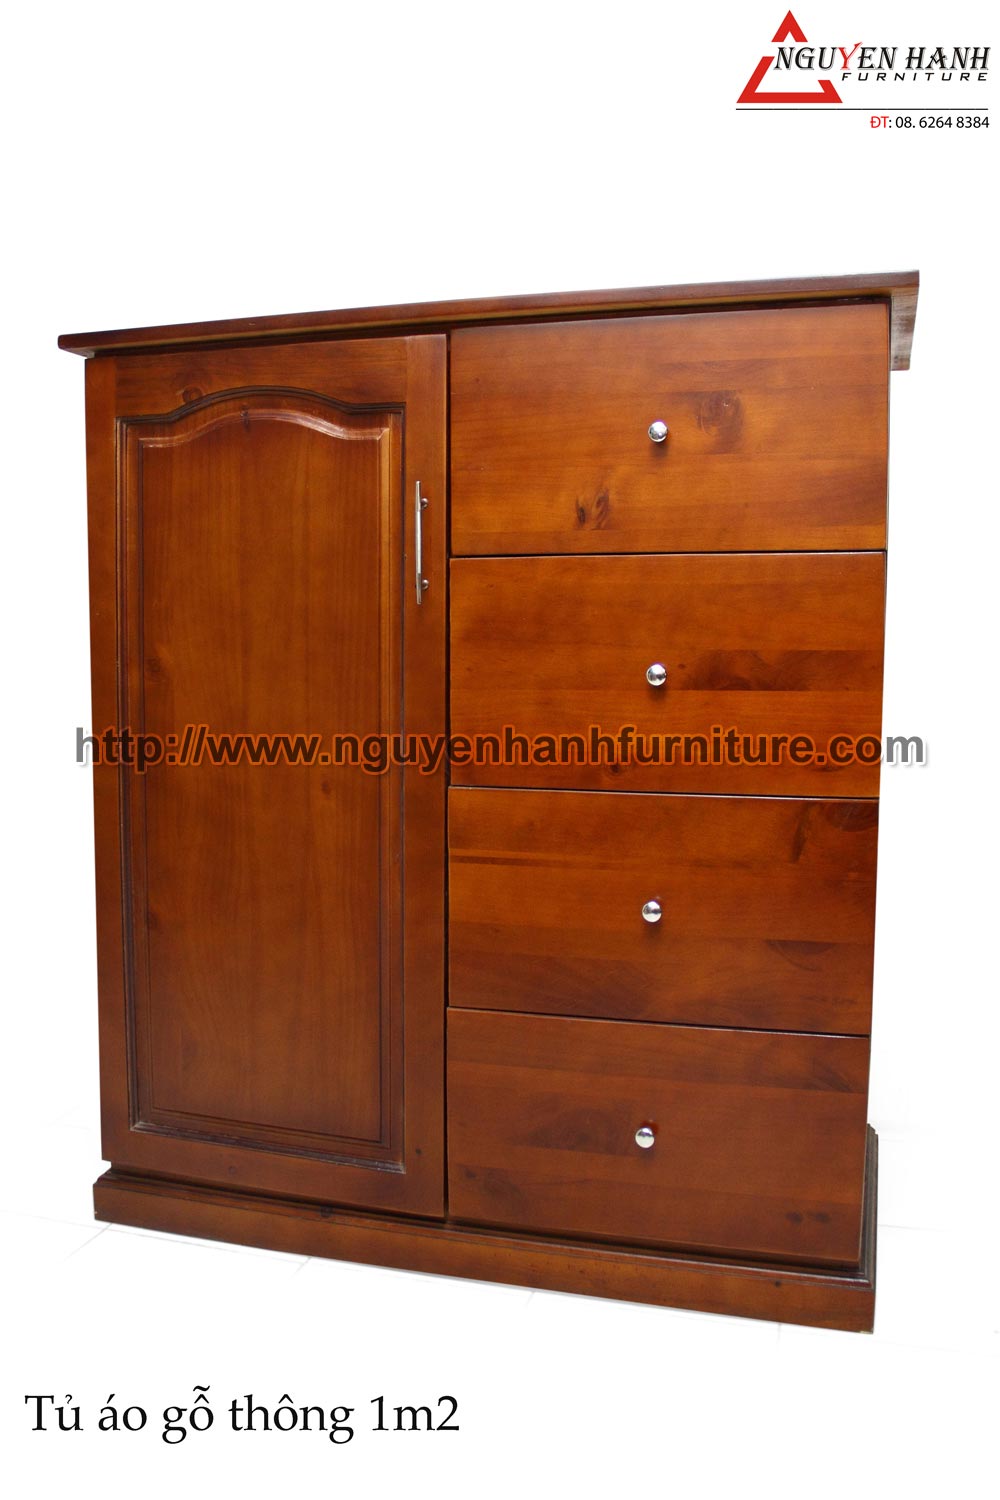 Name product: 1m2 Brown Pine wood Wardrobe with drawers - Dimensions: 50 x 100 x 126cm - Description: Natural pine wood